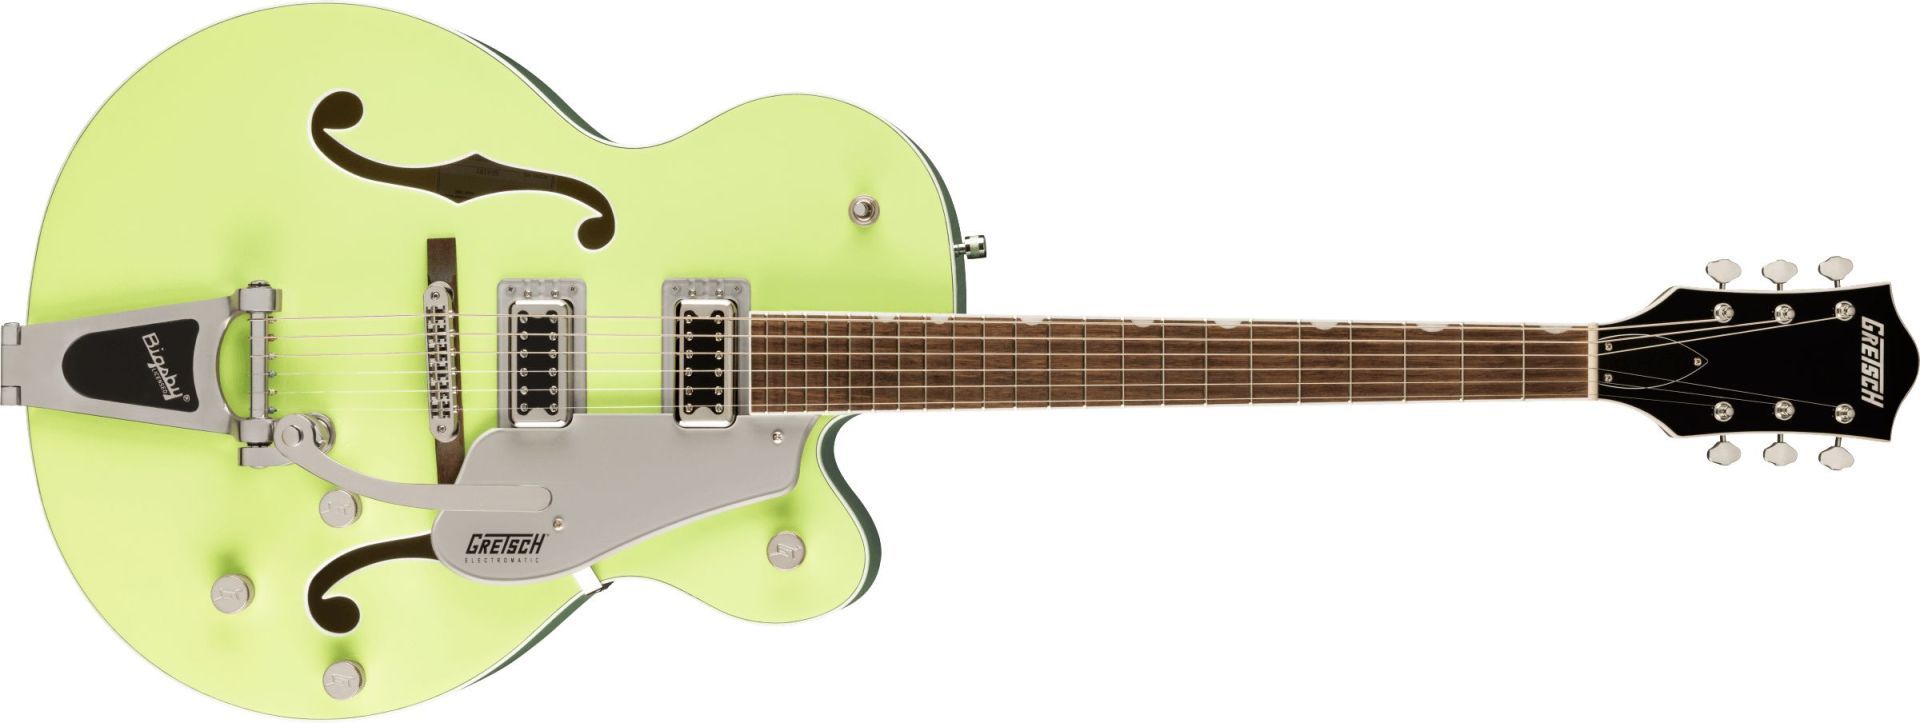 Gretsch Guitars G5420T Electromatic Classic Hollow Body Single-Cut with Bigsby Two-Tone Anniversary Green